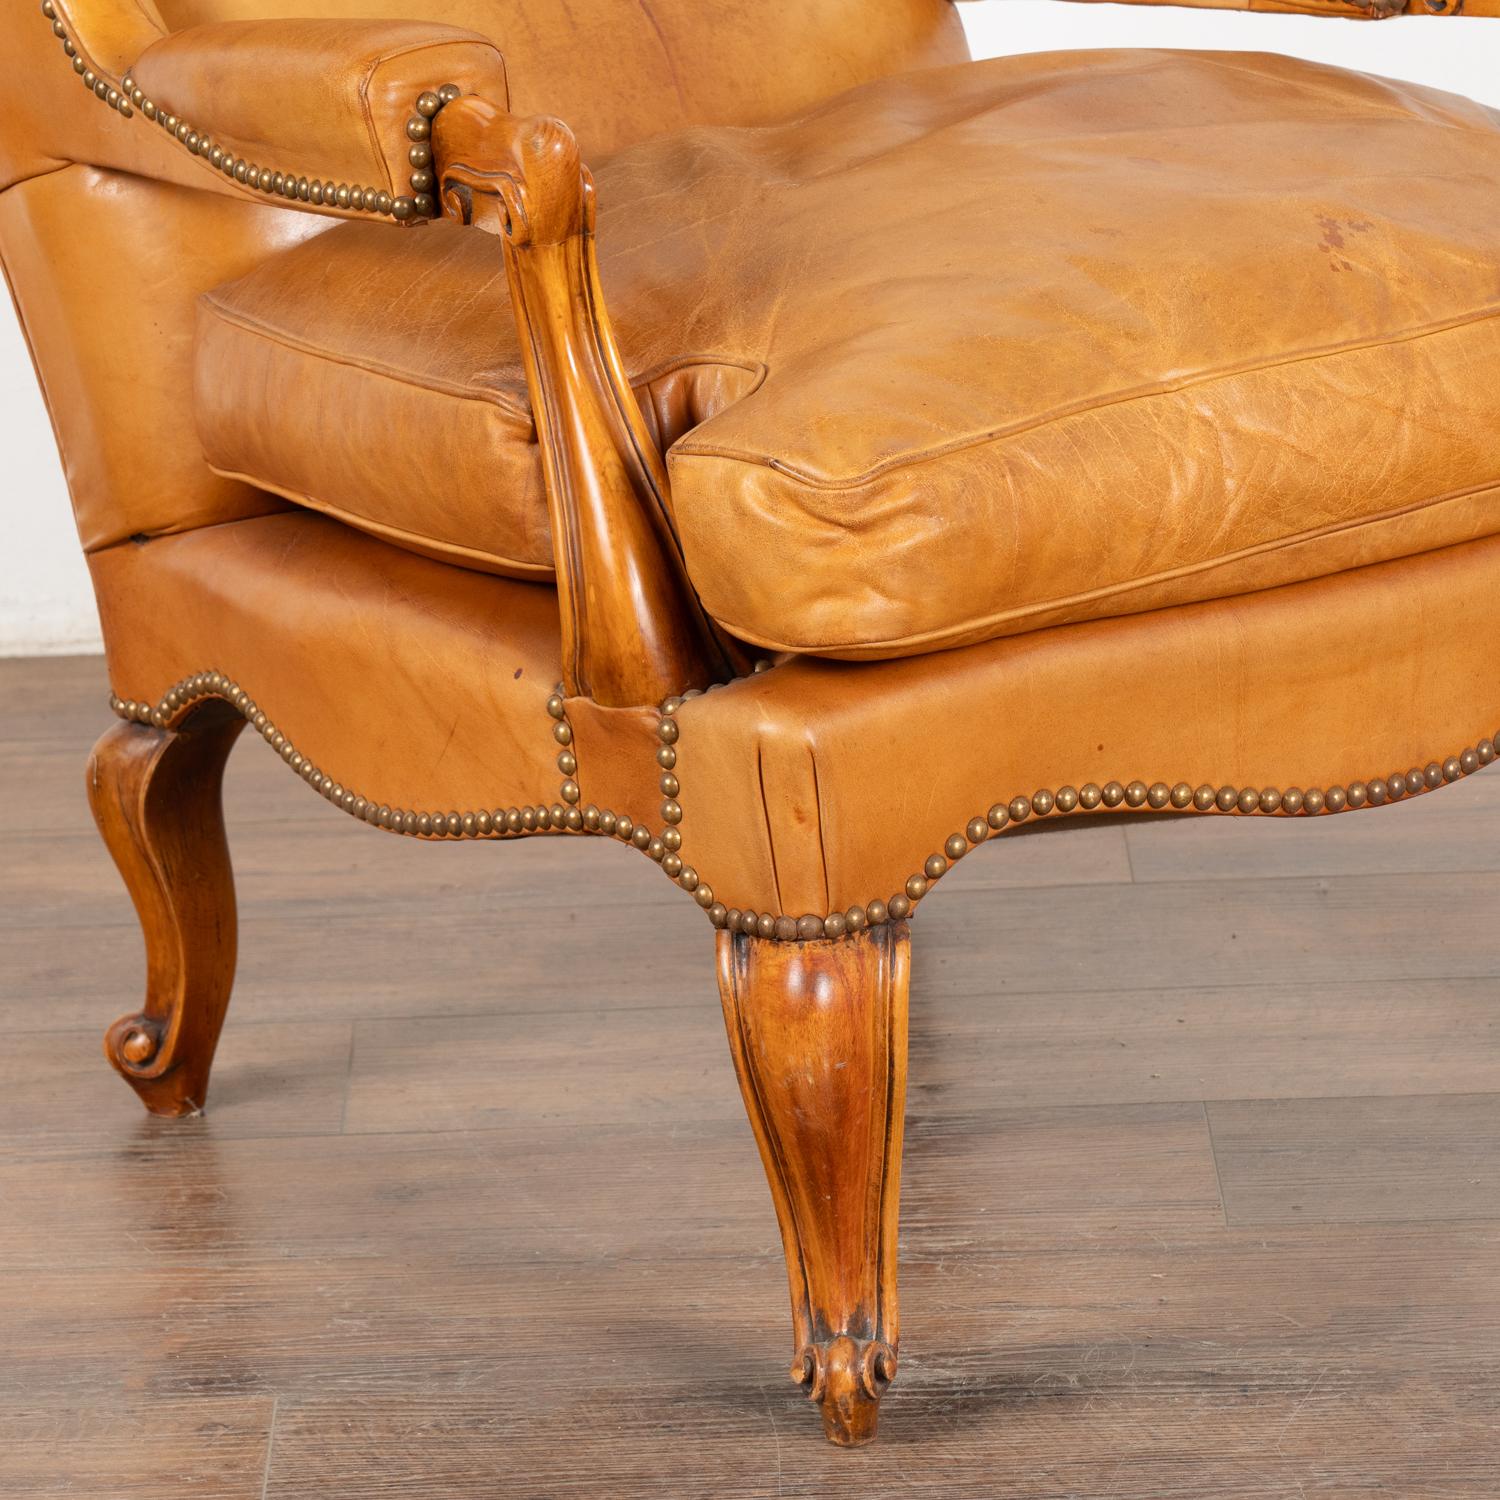 20th Century Vintage Camel Colored Leather Wingback Armchair, Denmark circa 1940 For Sale